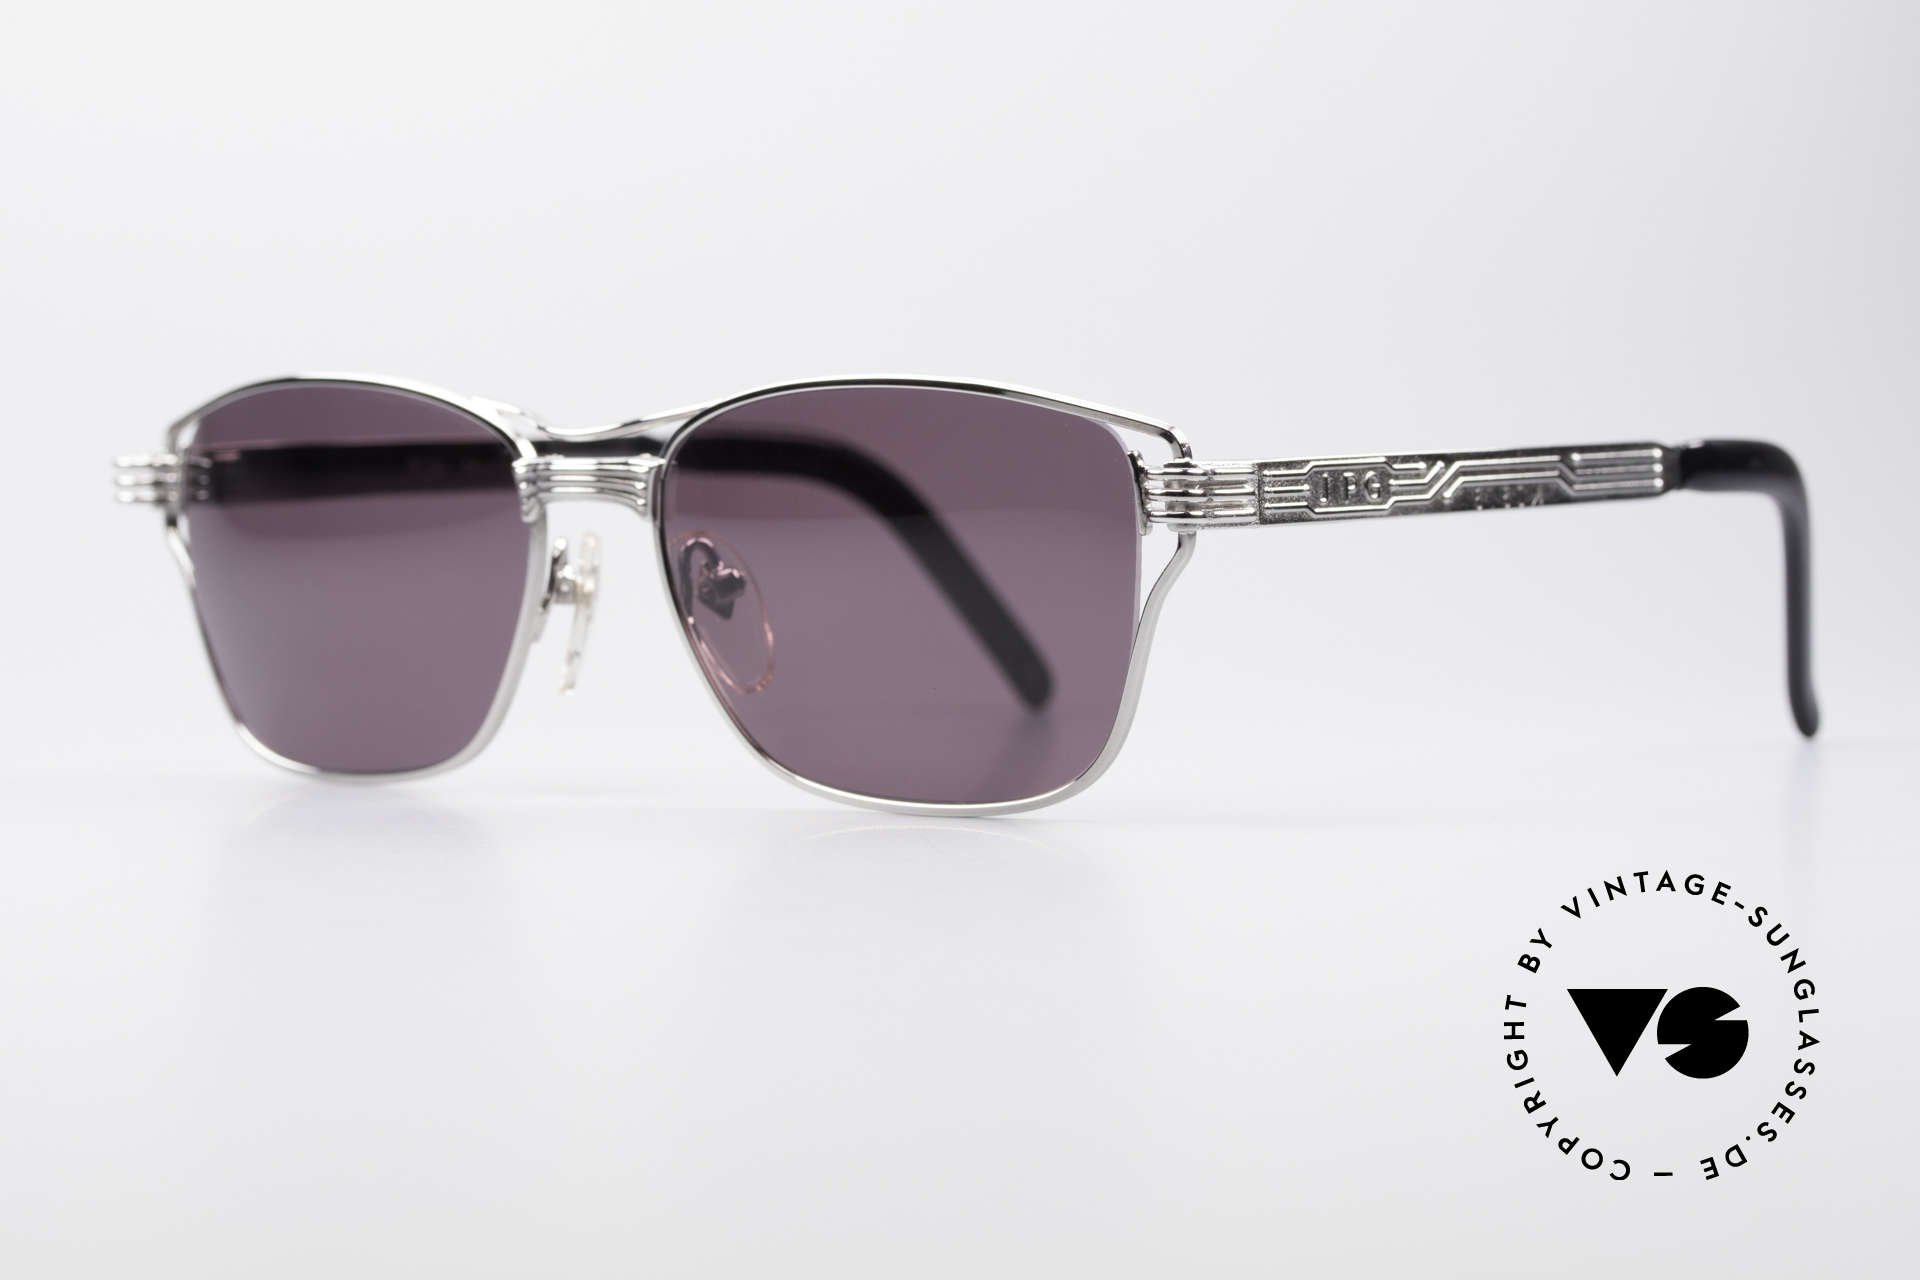 Jean Paul Gaultier 56-4173 Striking Square Sunglasses, interesting metal frame with many costly details, Made for Men